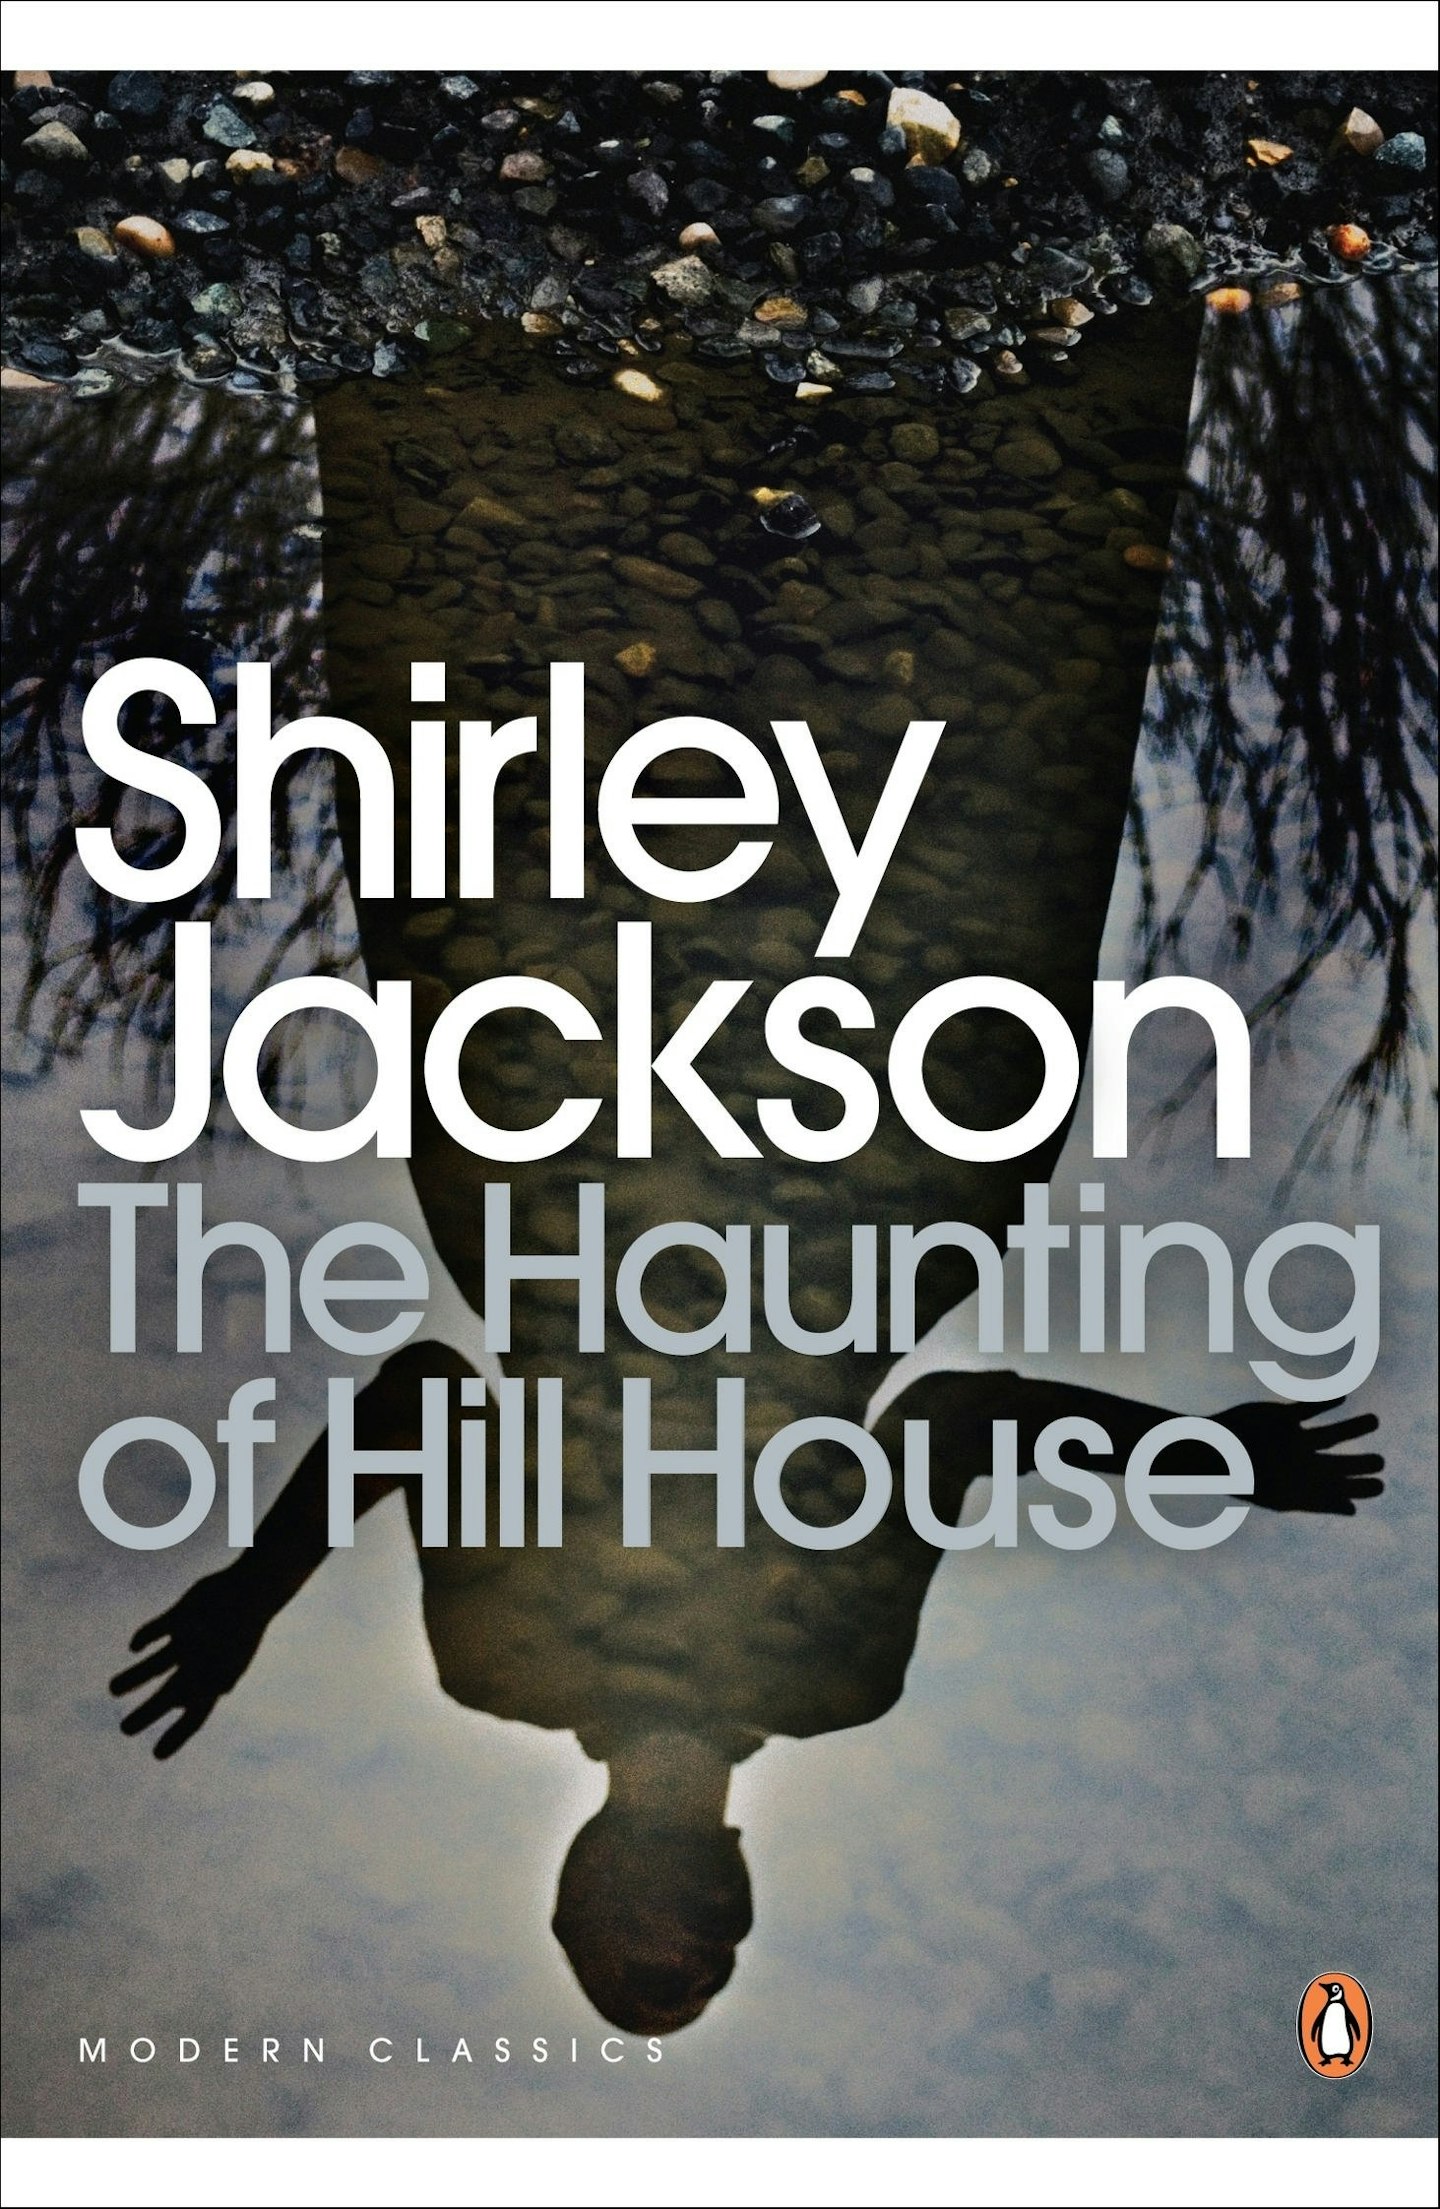 The Haunting of Hill House - Shirley Jackson (Penguin Modern Classics)